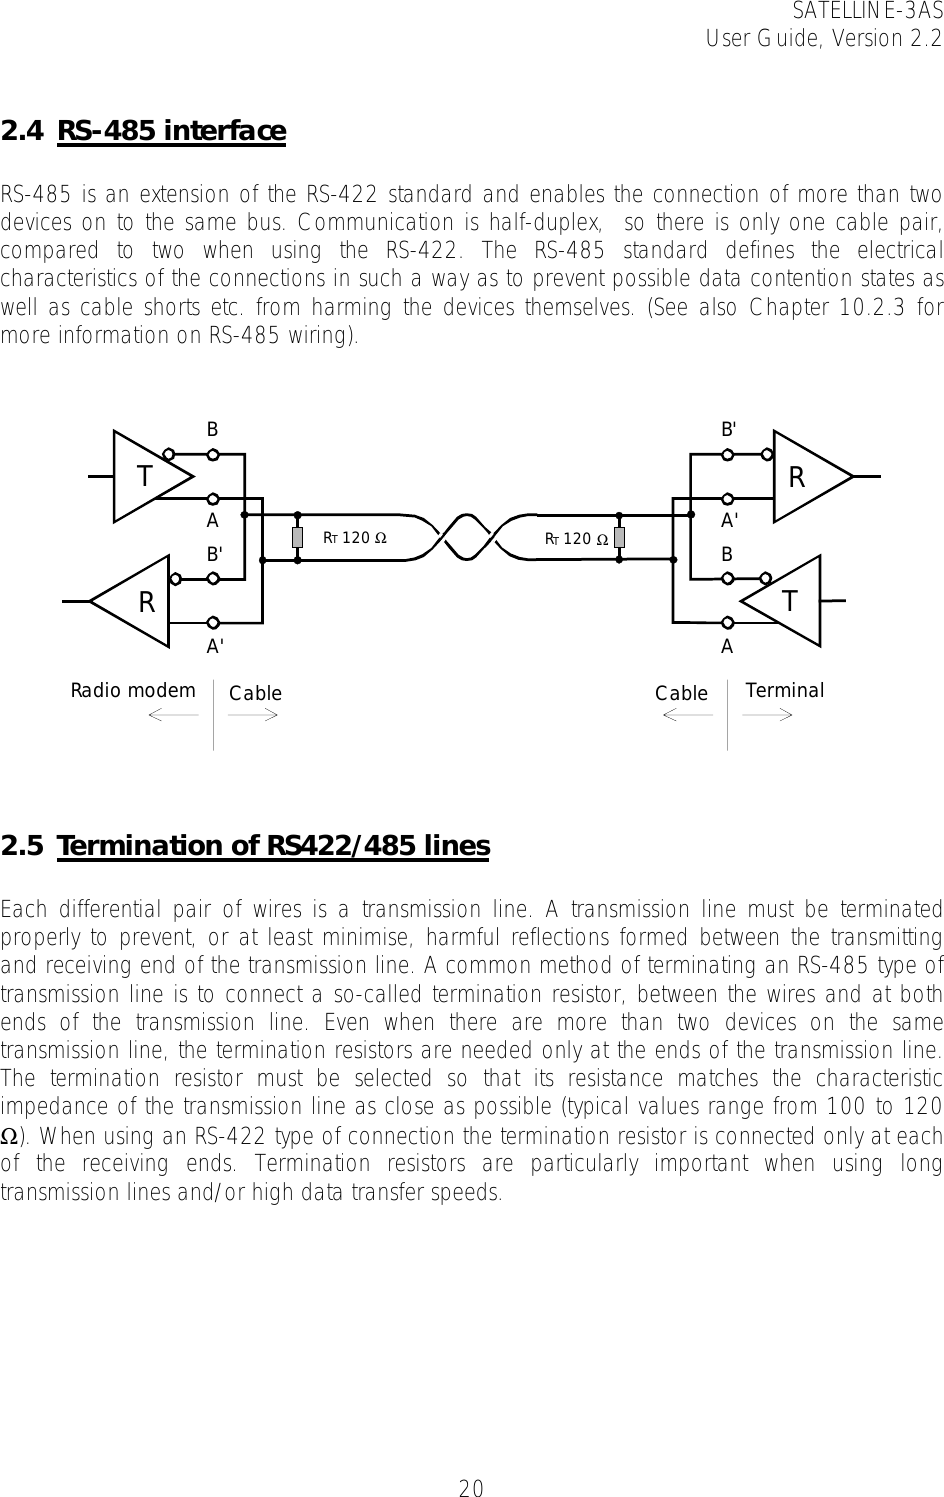 SATELLINE-3AS User Guide, Version 2.2   20 2.4 RS-485 interface  RS-485 is an extension of the RS-422 standard and enables the connection of more than two devices on to the same bus. Communication is half-duplex,  so there is only one cable pair,  compared to two when using the RS-422. The RS-485 standard defines the electrical characteristics of the connections in such a way as to prevent possible data contention states as well as cable shorts etc. from harming the devices themselves. (See also Chapter 10.2.3 for more information on RS-485 wiring).     2.5 Termination of RS422/485 lines    Each differential pair of wires is a transmission line. A transmission line must be terminated properly to prevent, or at least minimise, harmful reflections formed between the transmitting and receiving end of the transmission line. A common method of terminating an RS-485 type of transmission line is to connect a so-called termination resistor, between the wires and at both ends of the transmission line. Even when there are more than two devices on the same transmission line, the termination resistors are needed only at the ends of the transmission line. The termination resistor must be selected so that its resistance matches the characteristic impedance of the transmission line as close as possible (typical values range from 100 to 120 Ω). When using an RS-422 type of connection the termination resistor is connected only at each of the receiving ends. Termination resistors are particularly important when using long transmission lines and/or high data transfer speeds.  RT 120 ΩRadio modem Cable TerminalCableRT 120 ΩRTBAB&apos;A&apos;TRB&apos;A&apos;BA